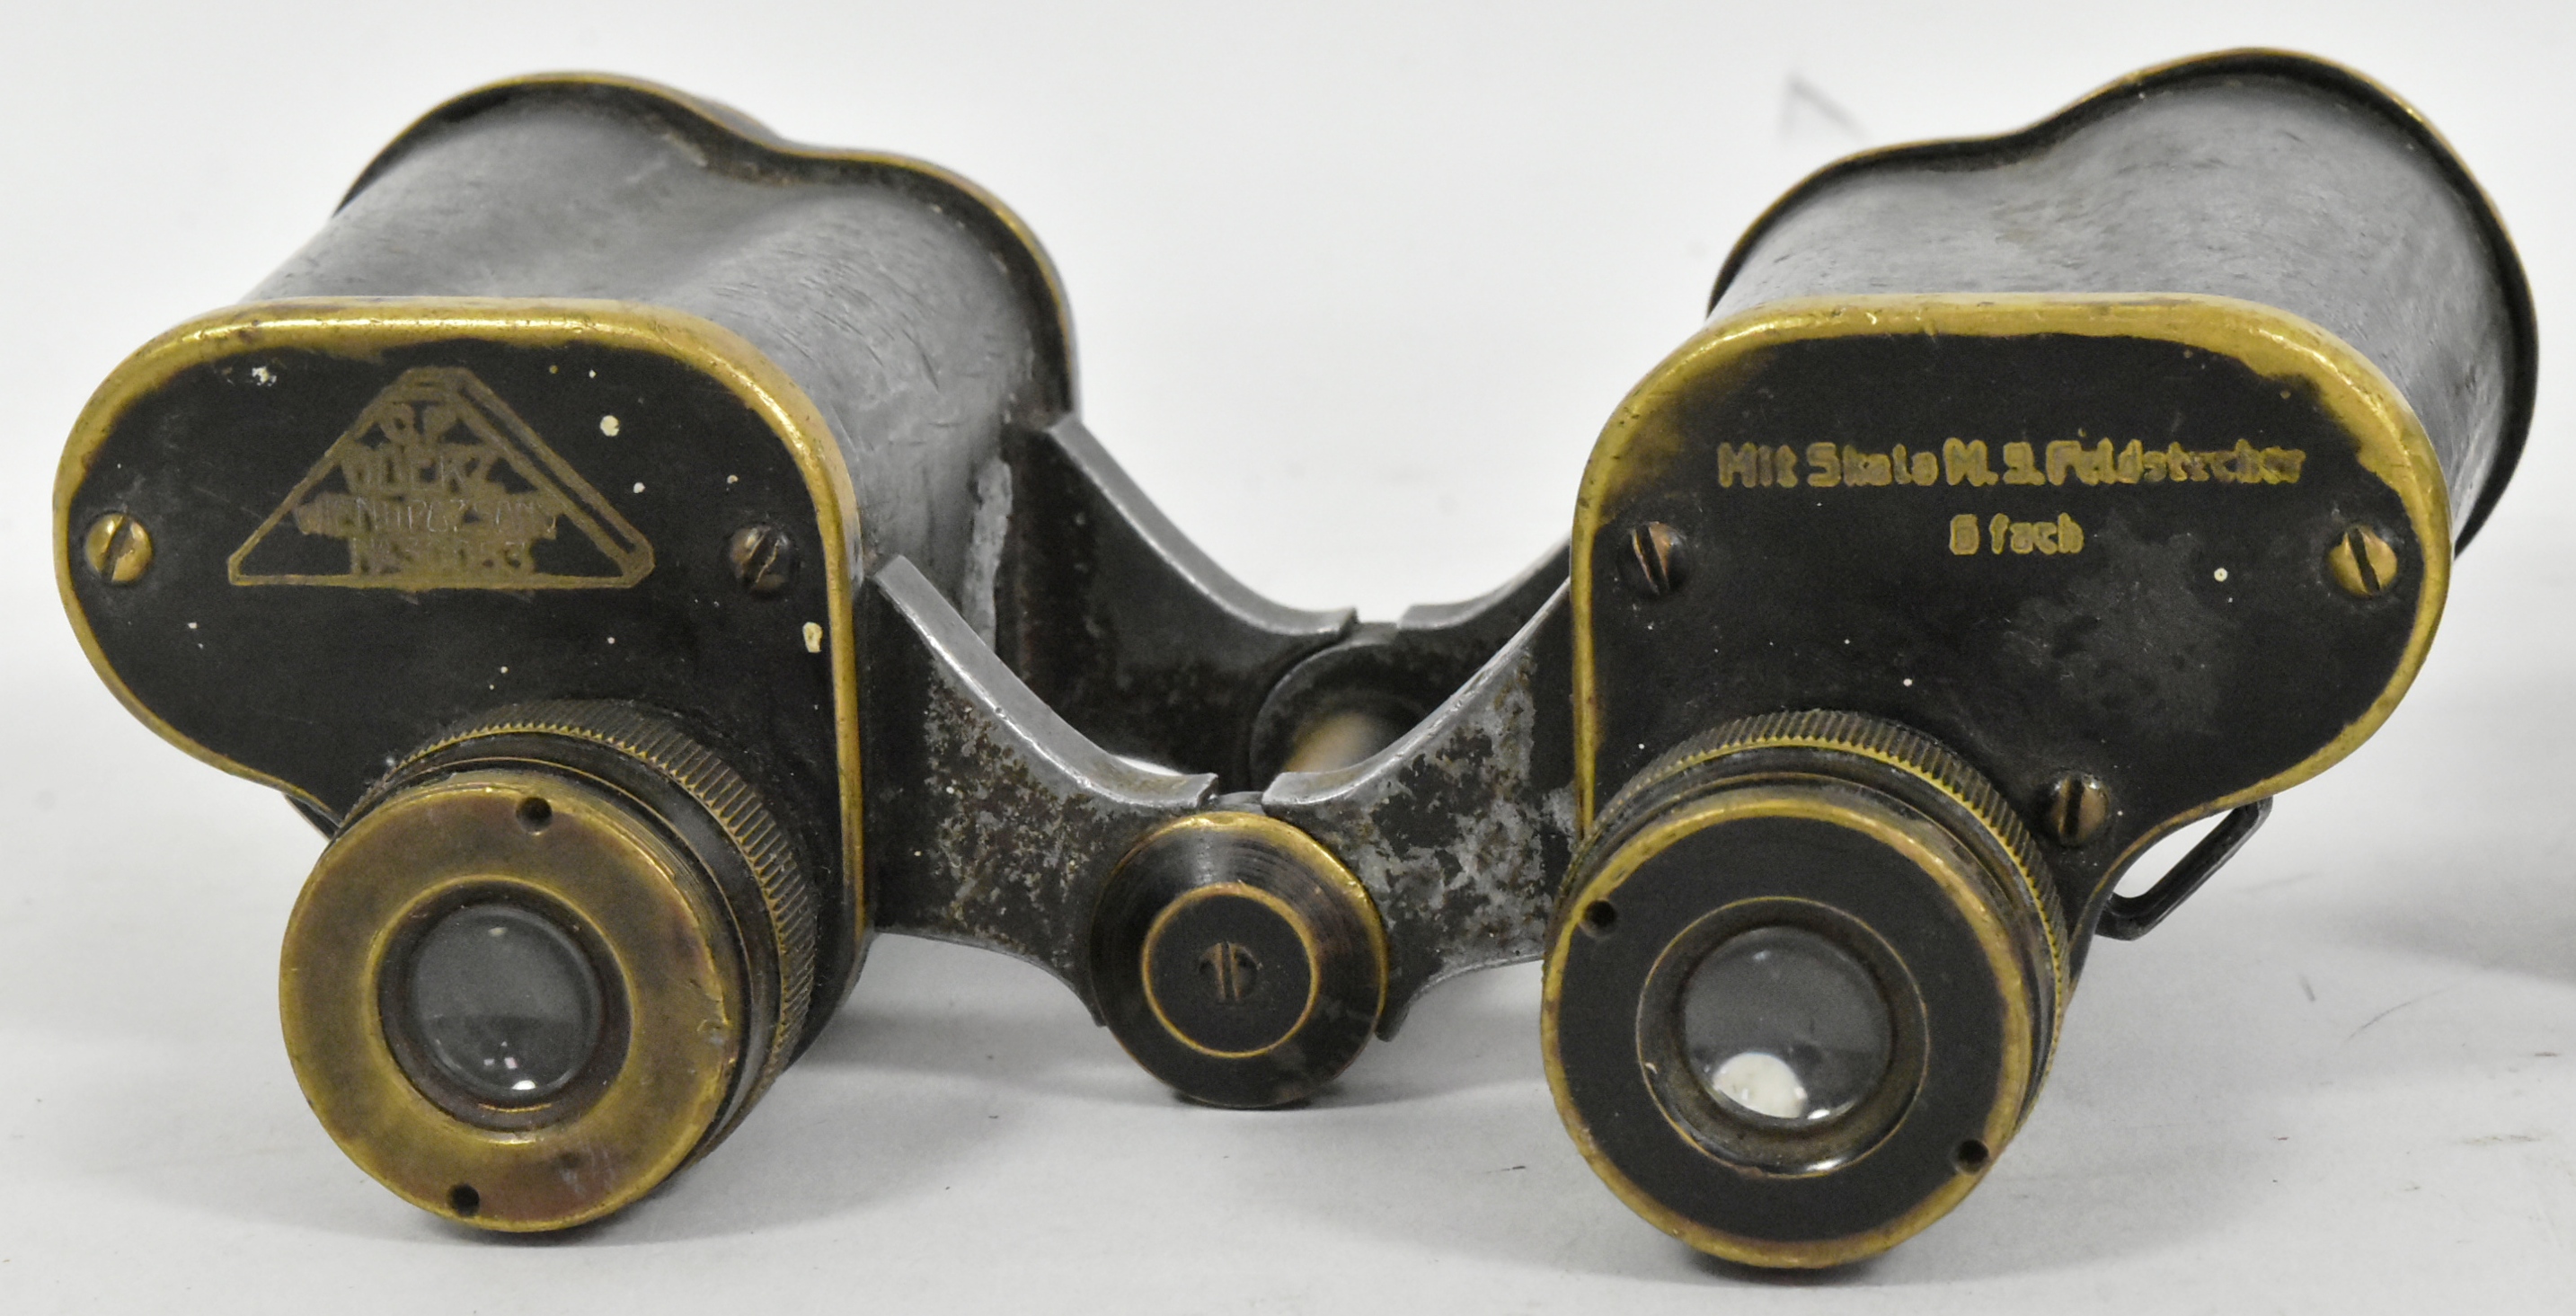 TWO PAIRS OF EARLY 20TH CENTURY BINOCULARS - Image 5 of 6